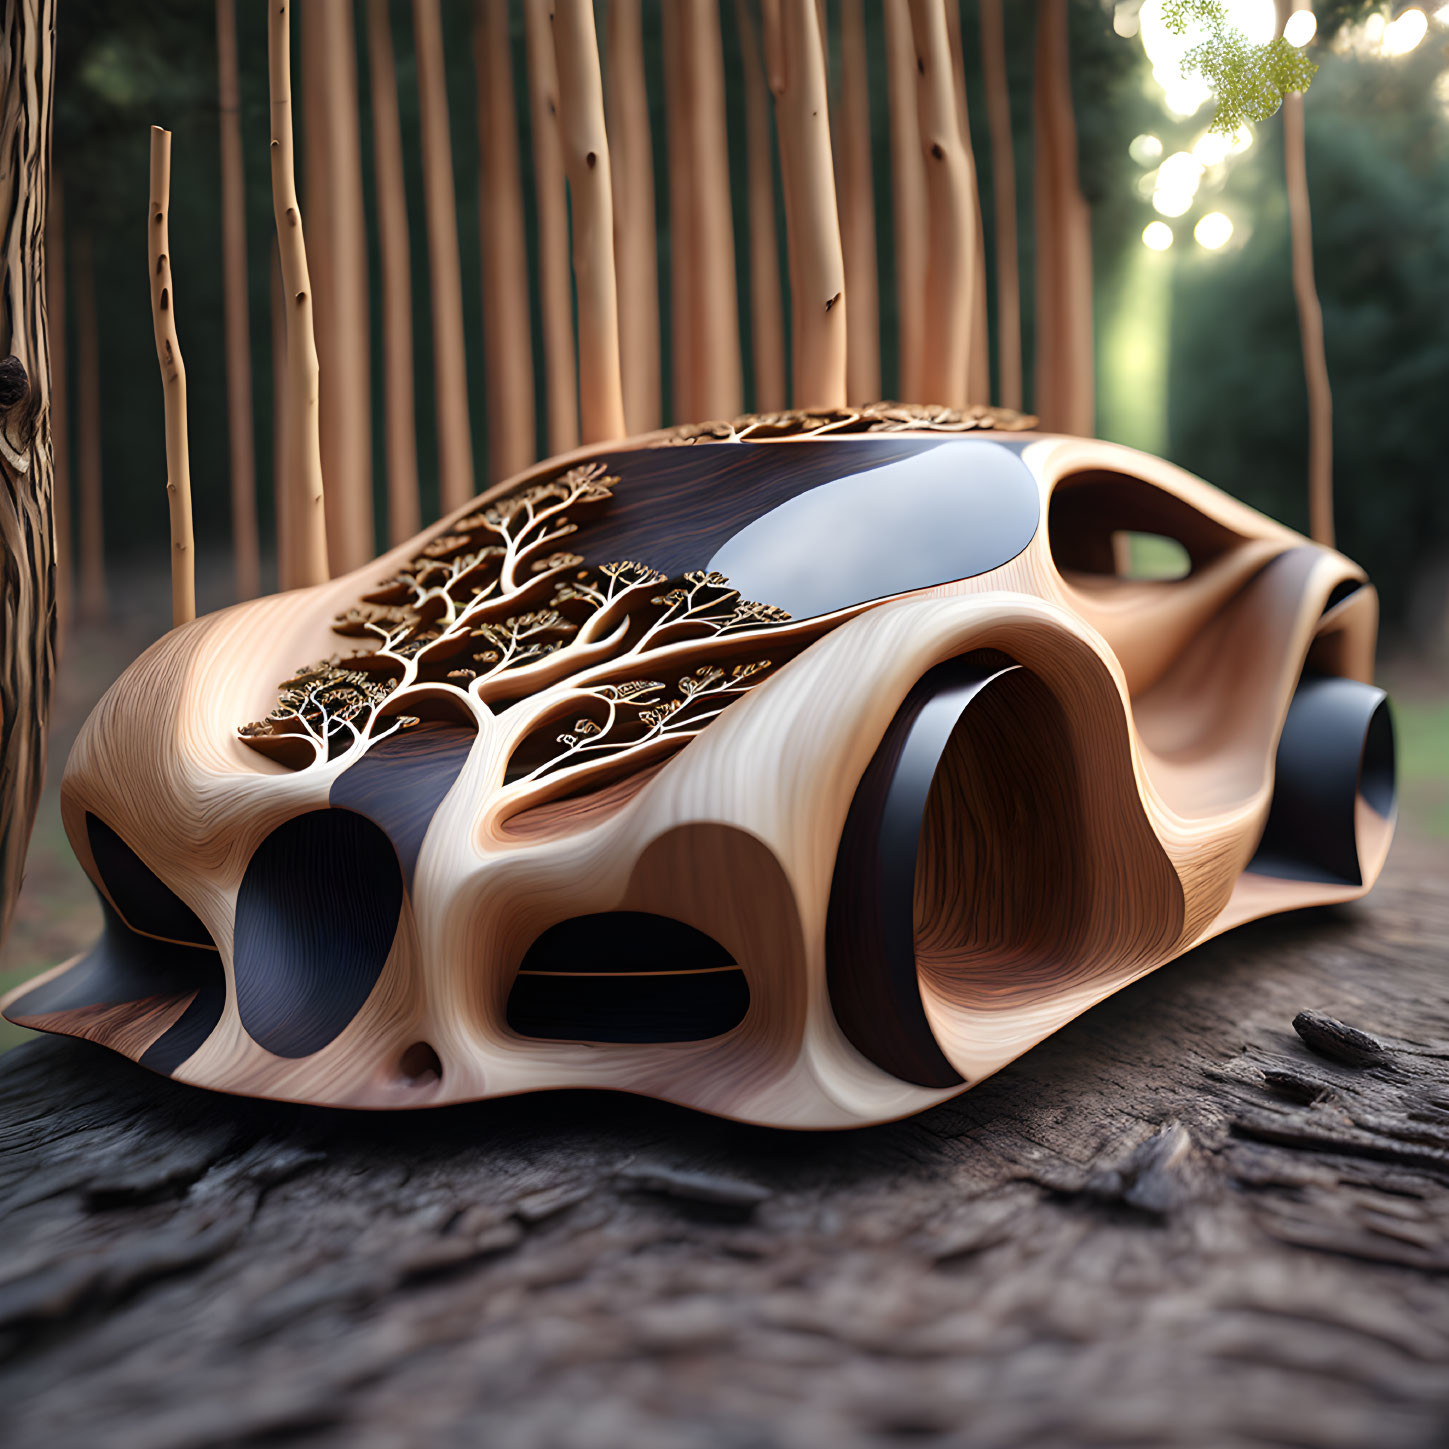 Futuristic wooden car concept with intricate tree branch designs